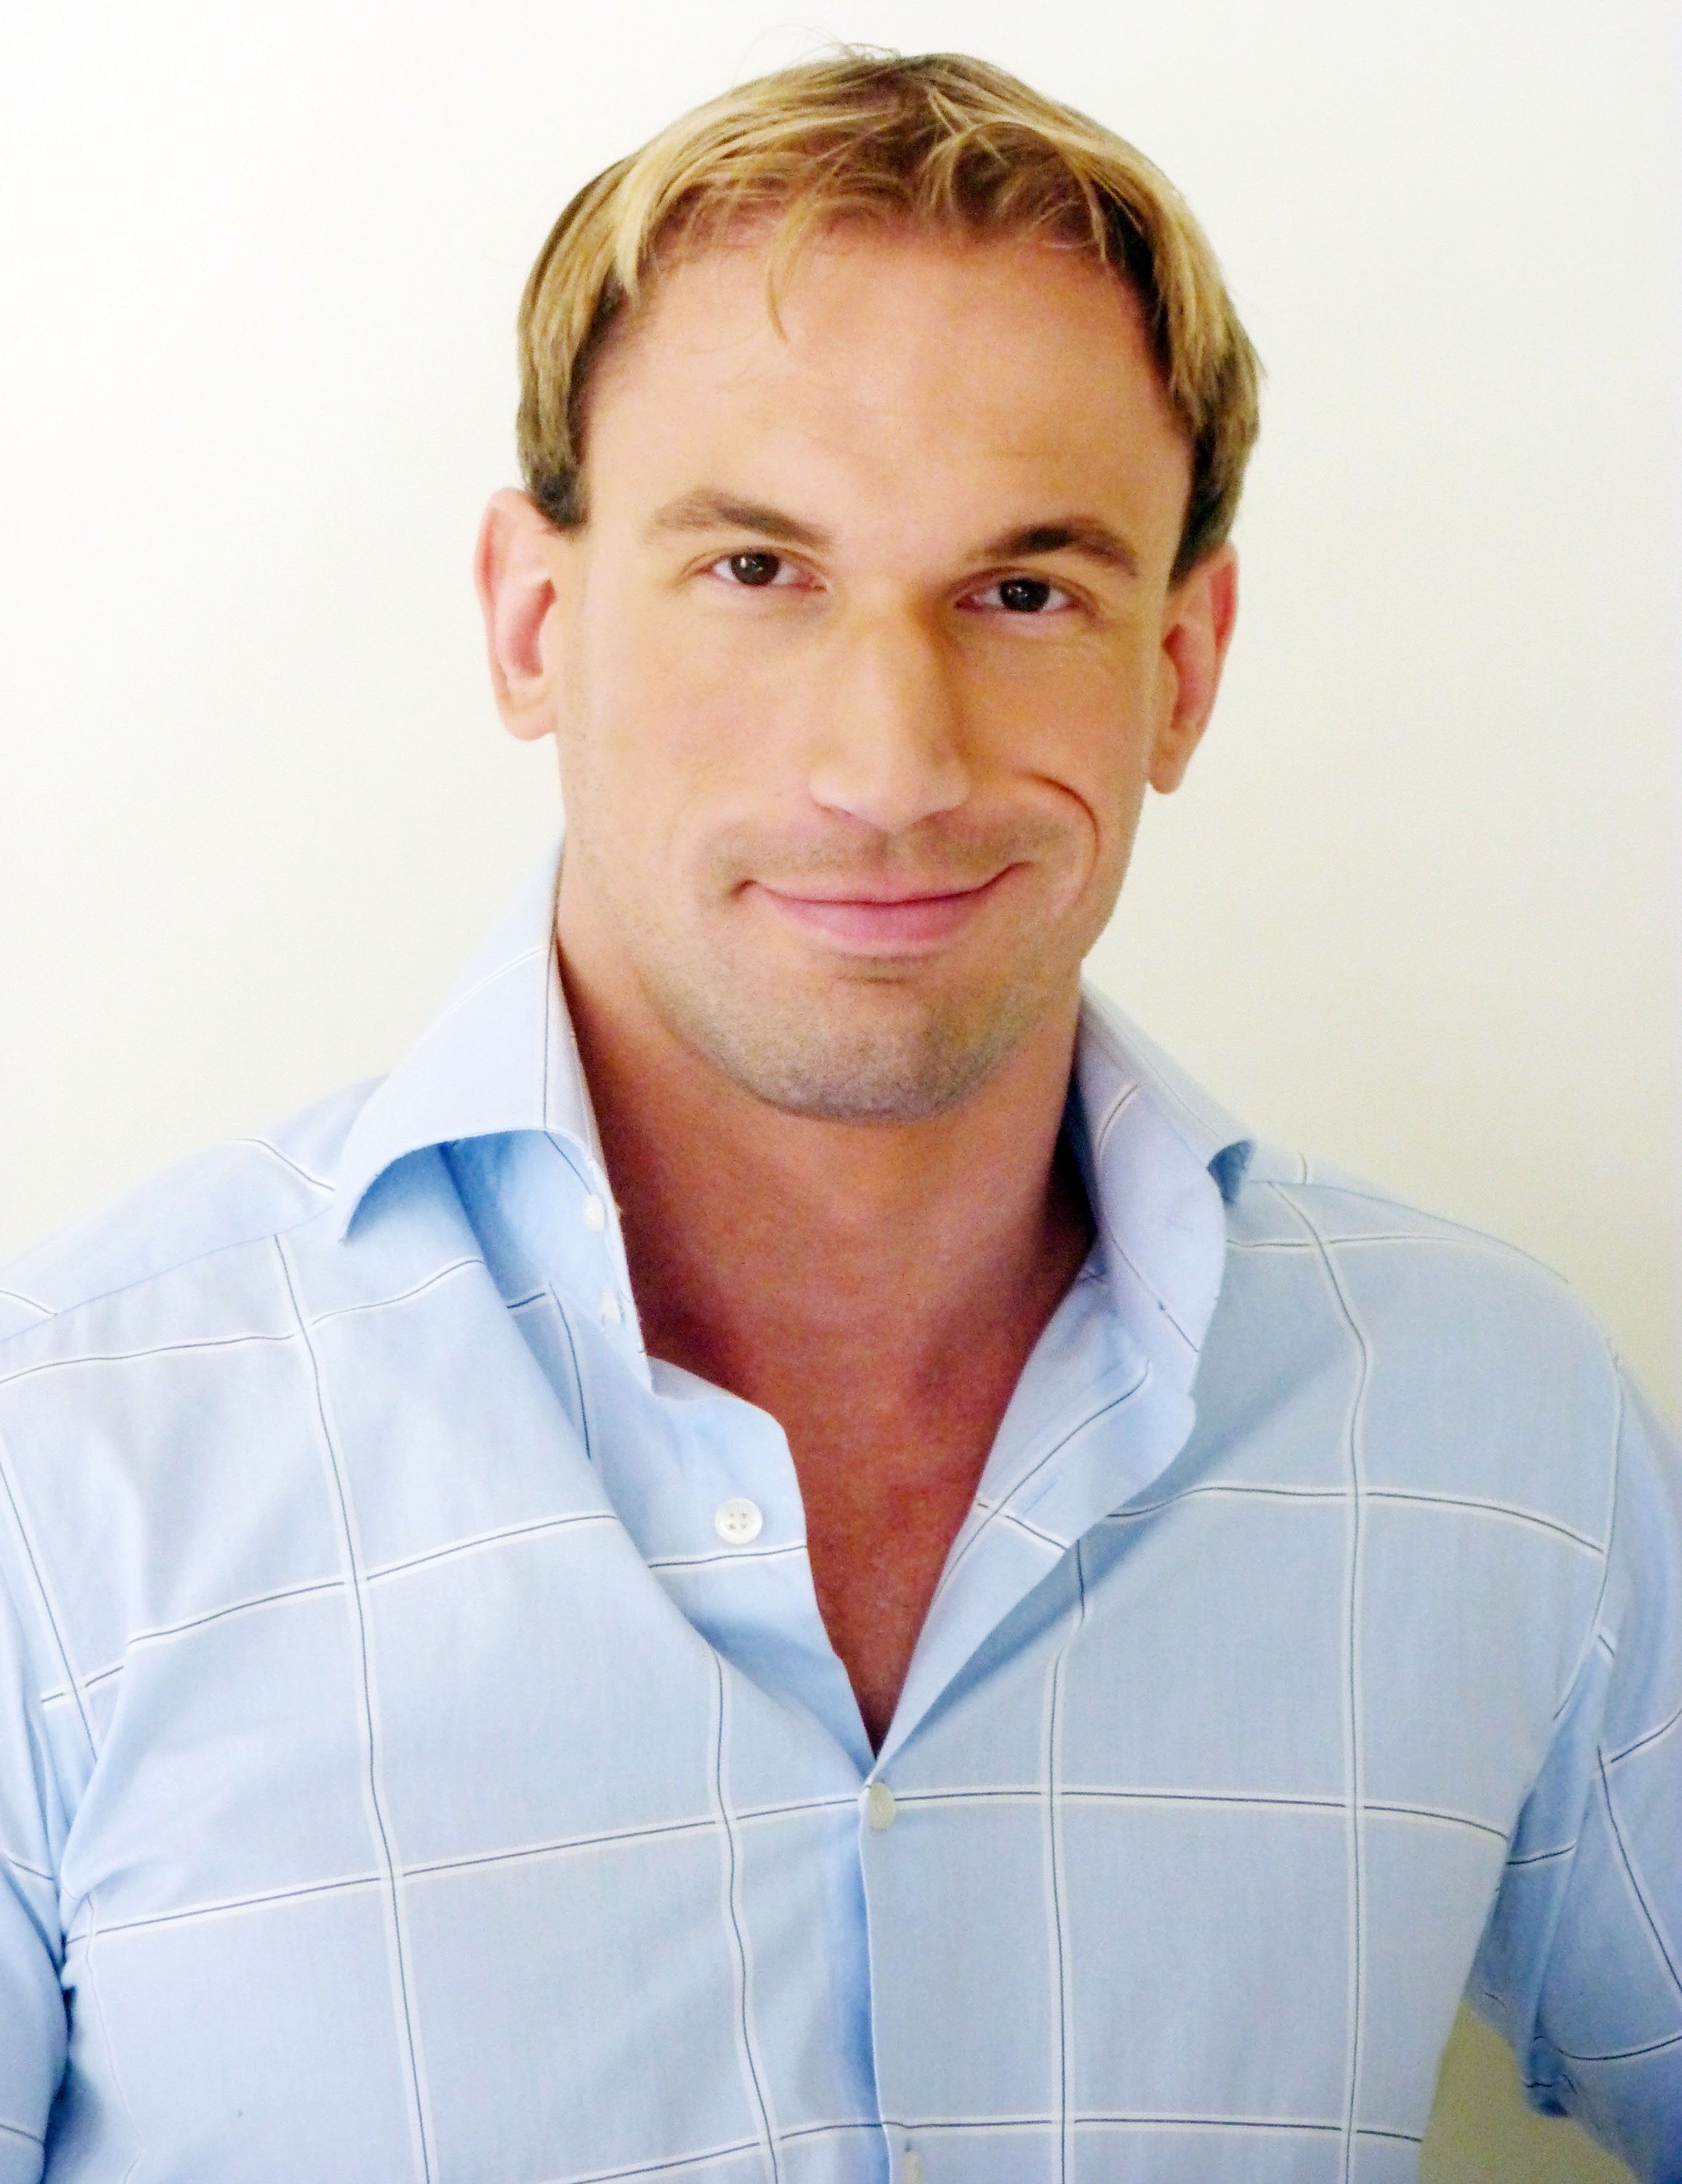 A Conversation with Dr Christian Jessen Drug Policy